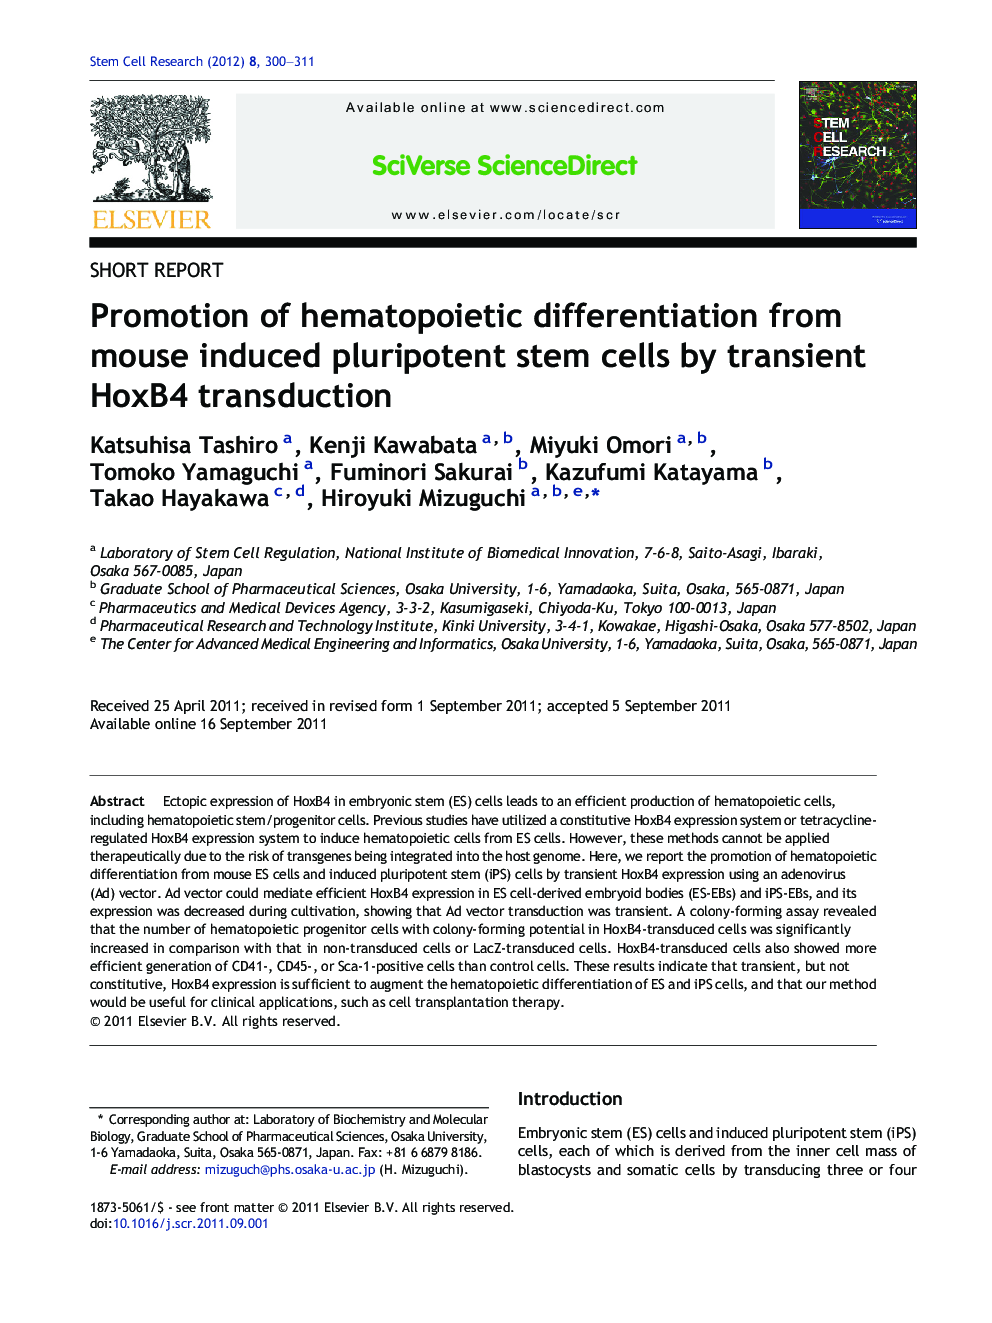 Promotion of hematopoietic differentiation from mouse induced pluripotent stem cells by transient HoxB4 transduction